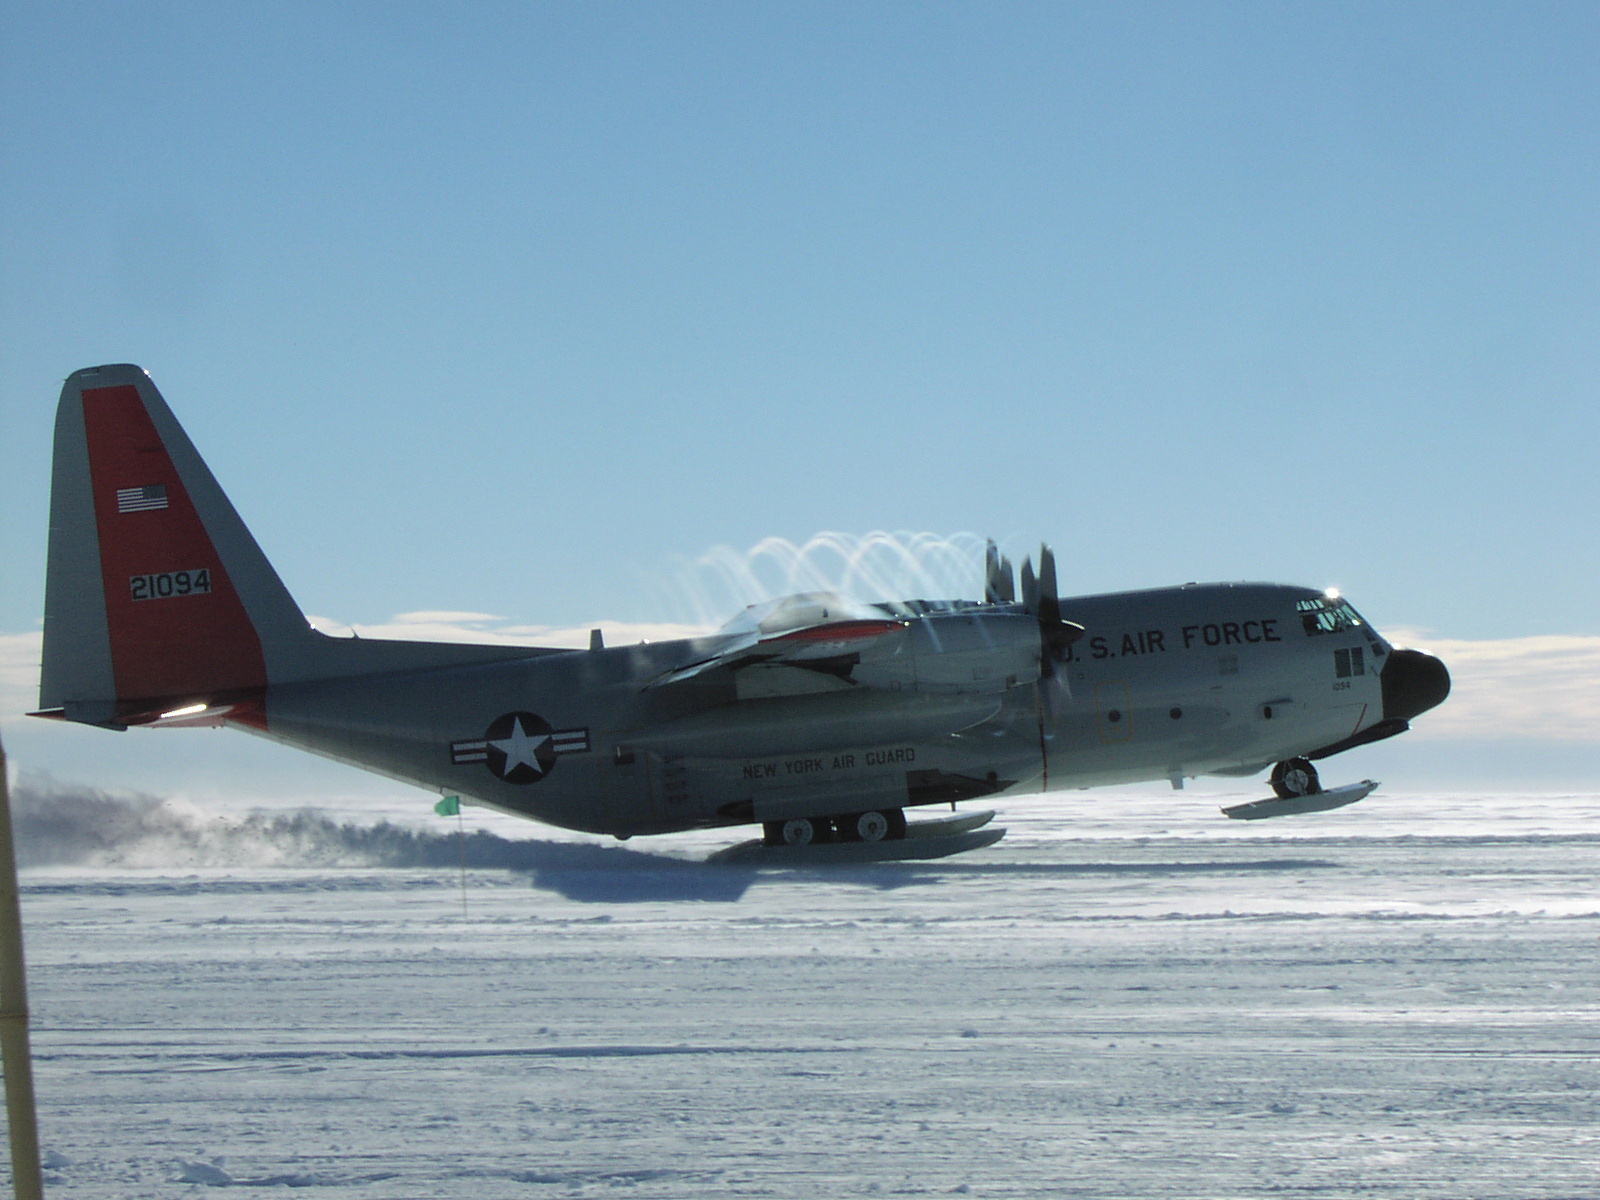 A ski-equipped airplane takes off from a snow covered surface.